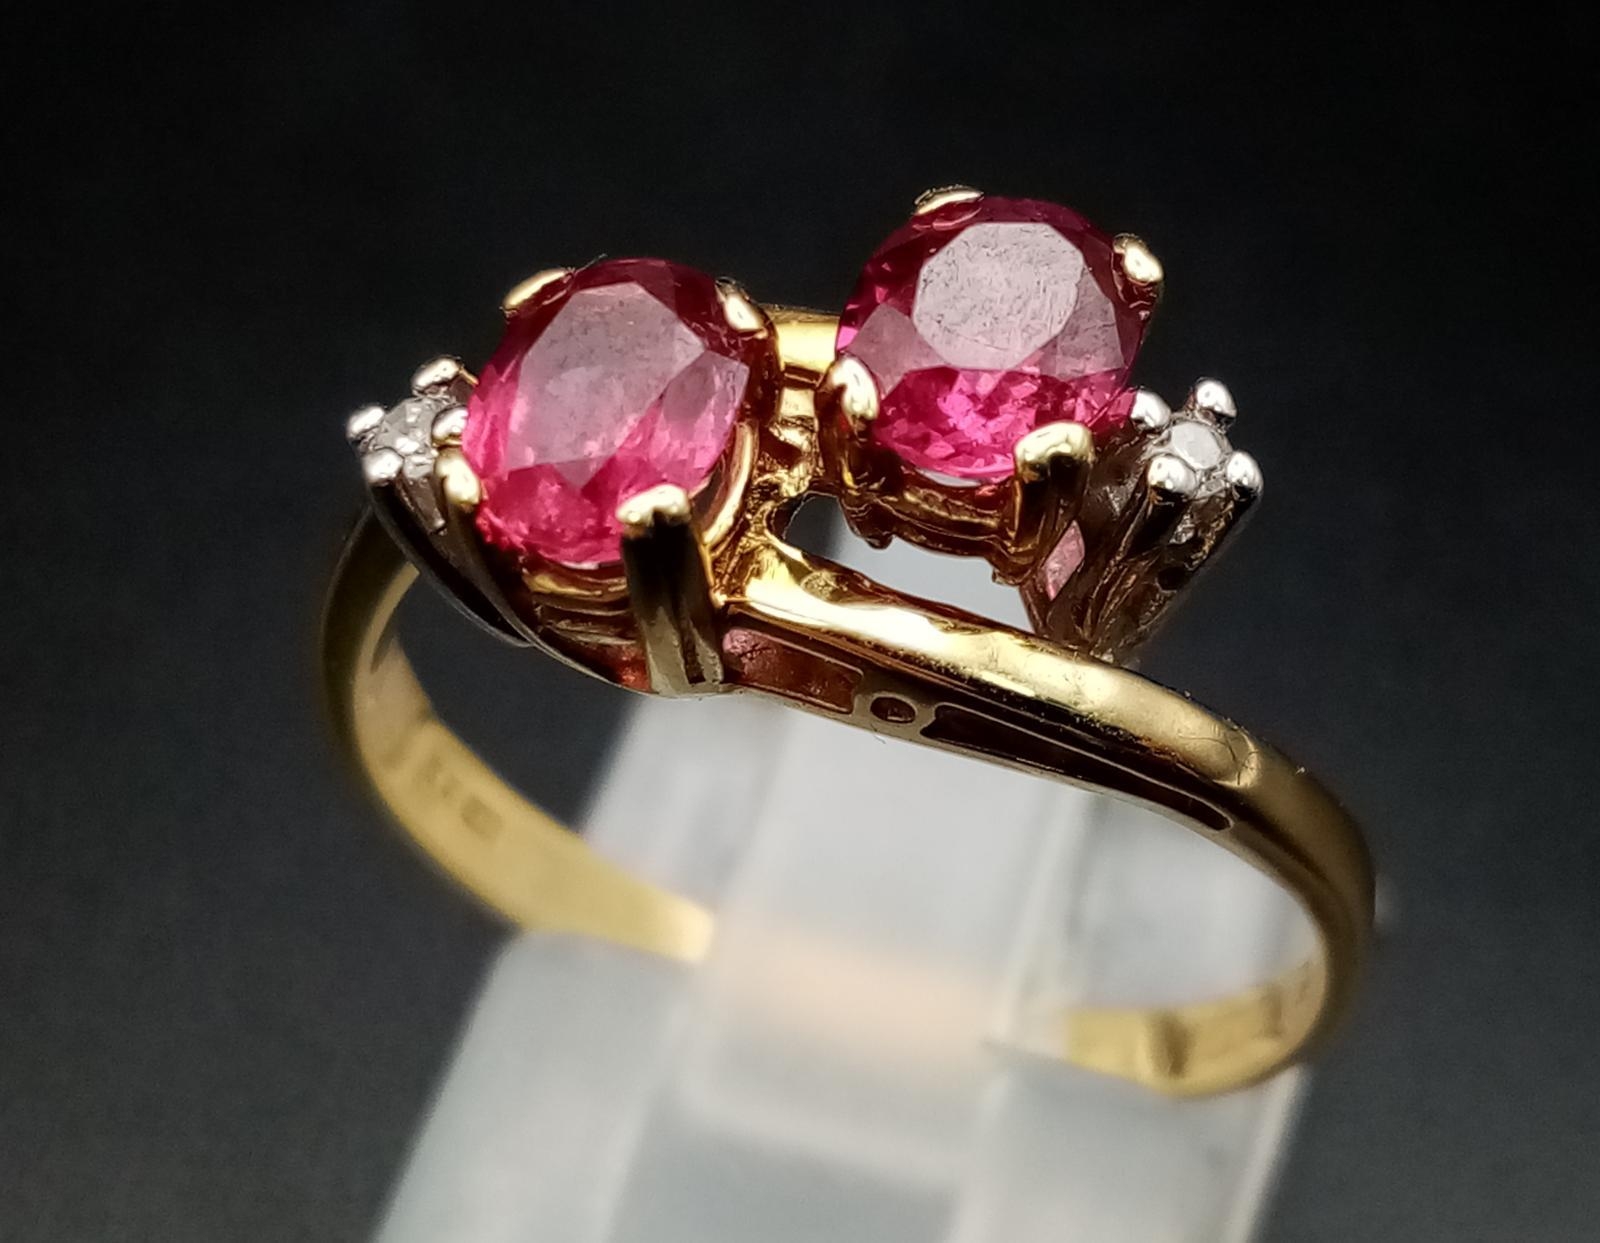 A 9 K yellow gold ring with diamonds and rubies in a twisted design. Ring size: P, weight: 2.6 g.